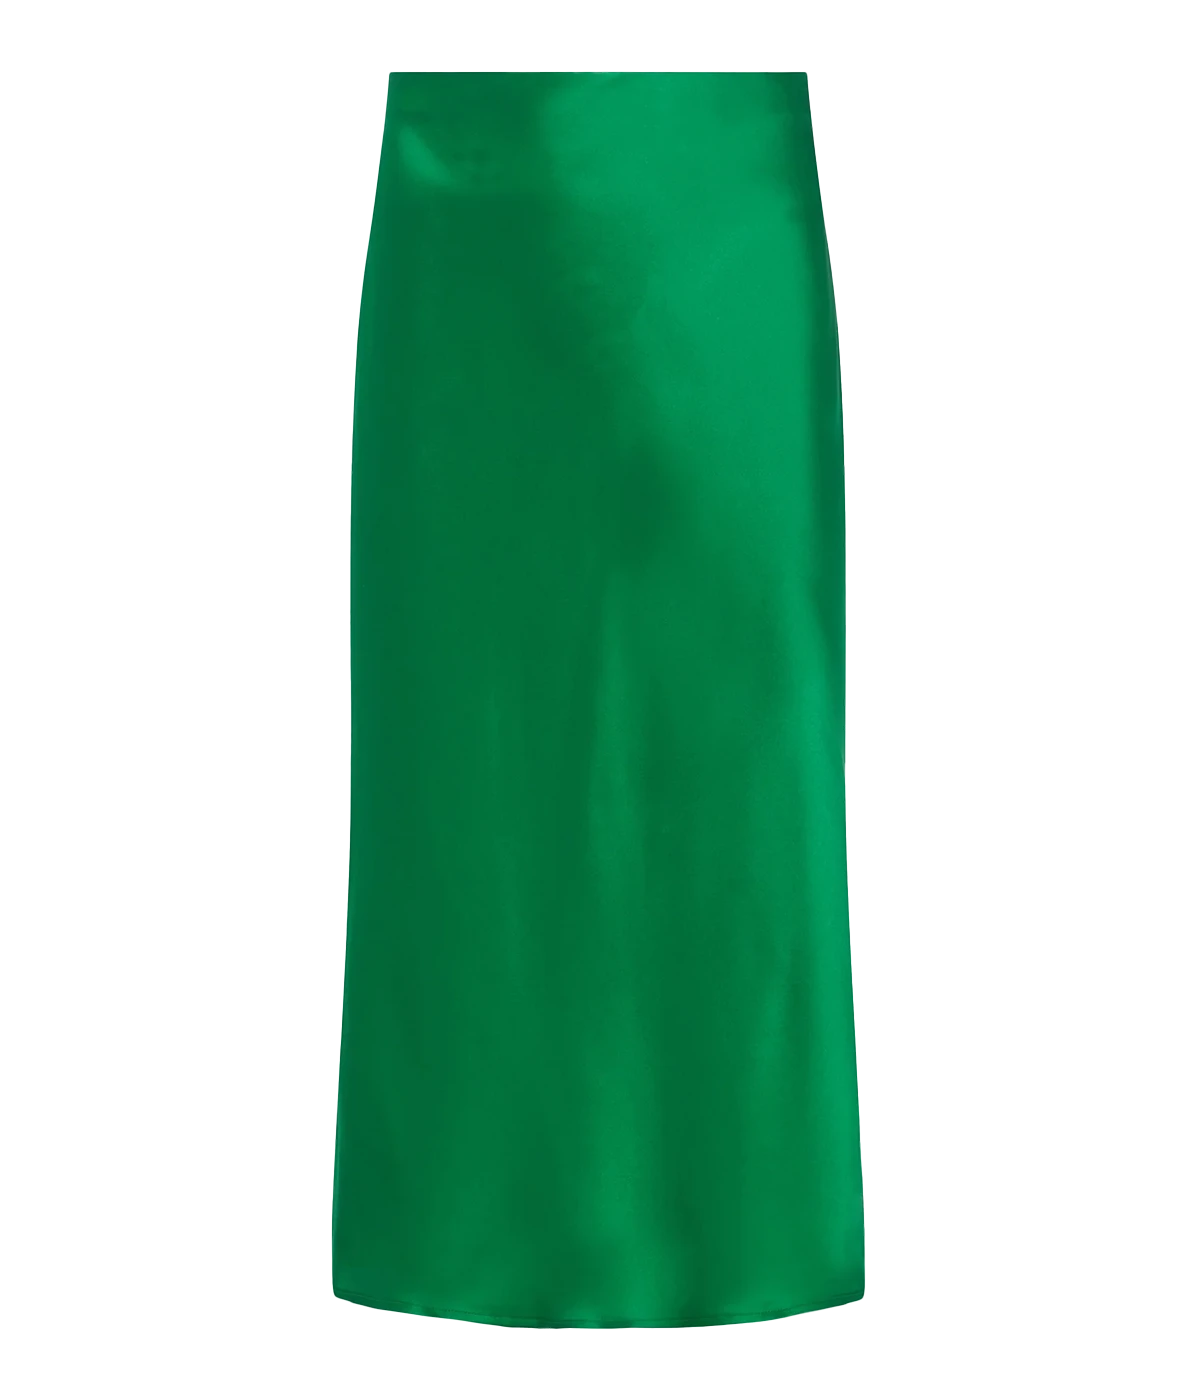 A midi length bias cut grass green skirt, 100% silk, fully lined & zipper closure. Sophisticated, elegant, date night outfit, long lunch, comfortable, throw on and go, made in California. 